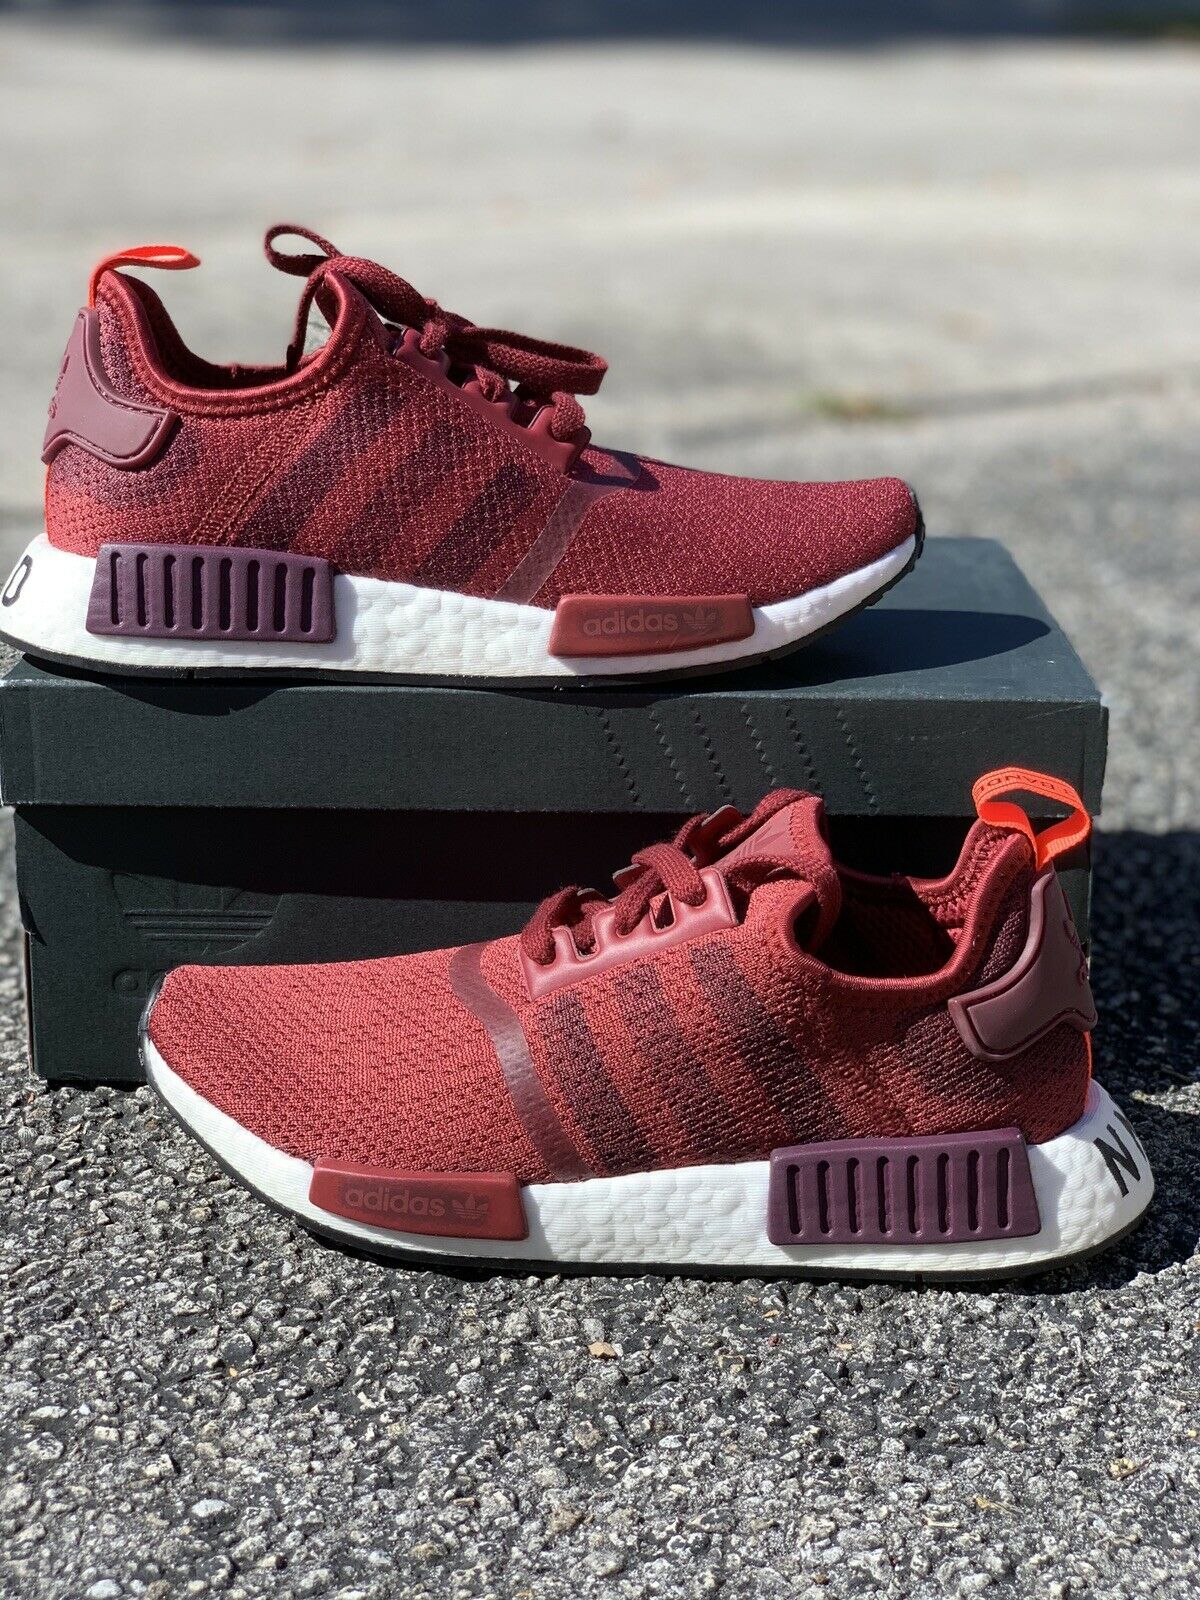 Adidas Women's NMD R1 Boost Shoes Burgundy White Stencil Pack G27937 Size 7